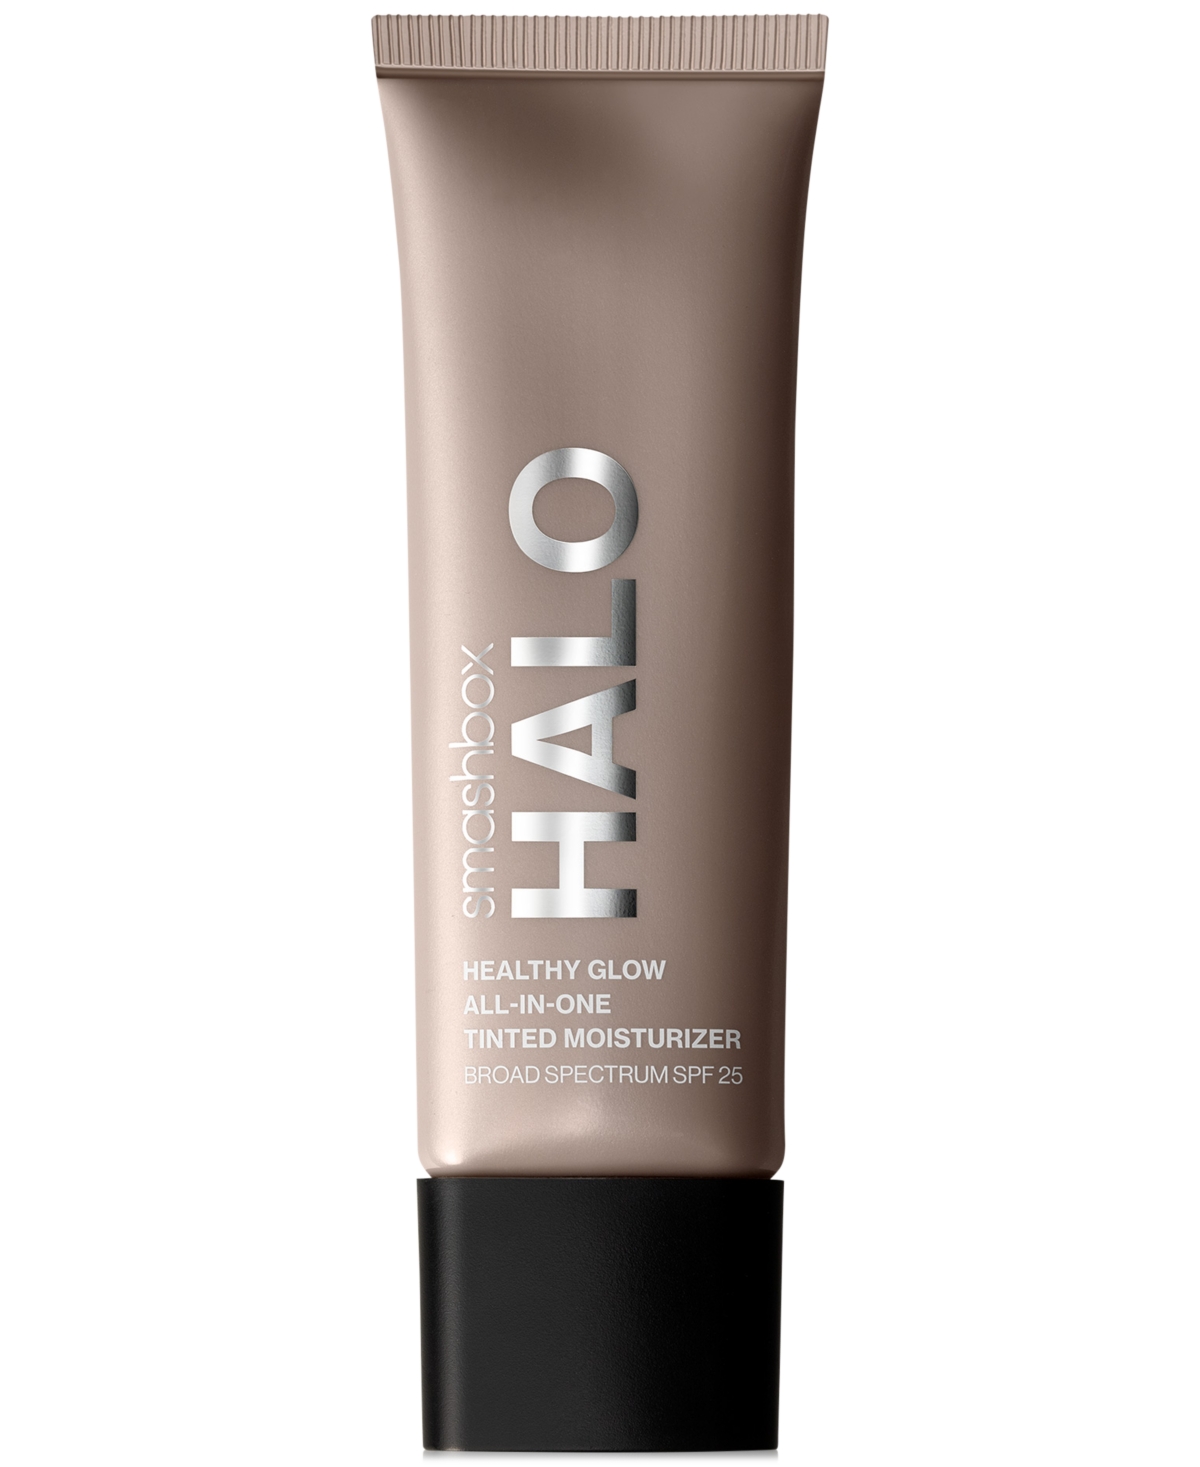 Smashbox Halo Healthy Glow Tinted Moisturizer Broad Spectrum Spf 25, 1.4-oz. In Tan Olive (tan With Olive Undertone)